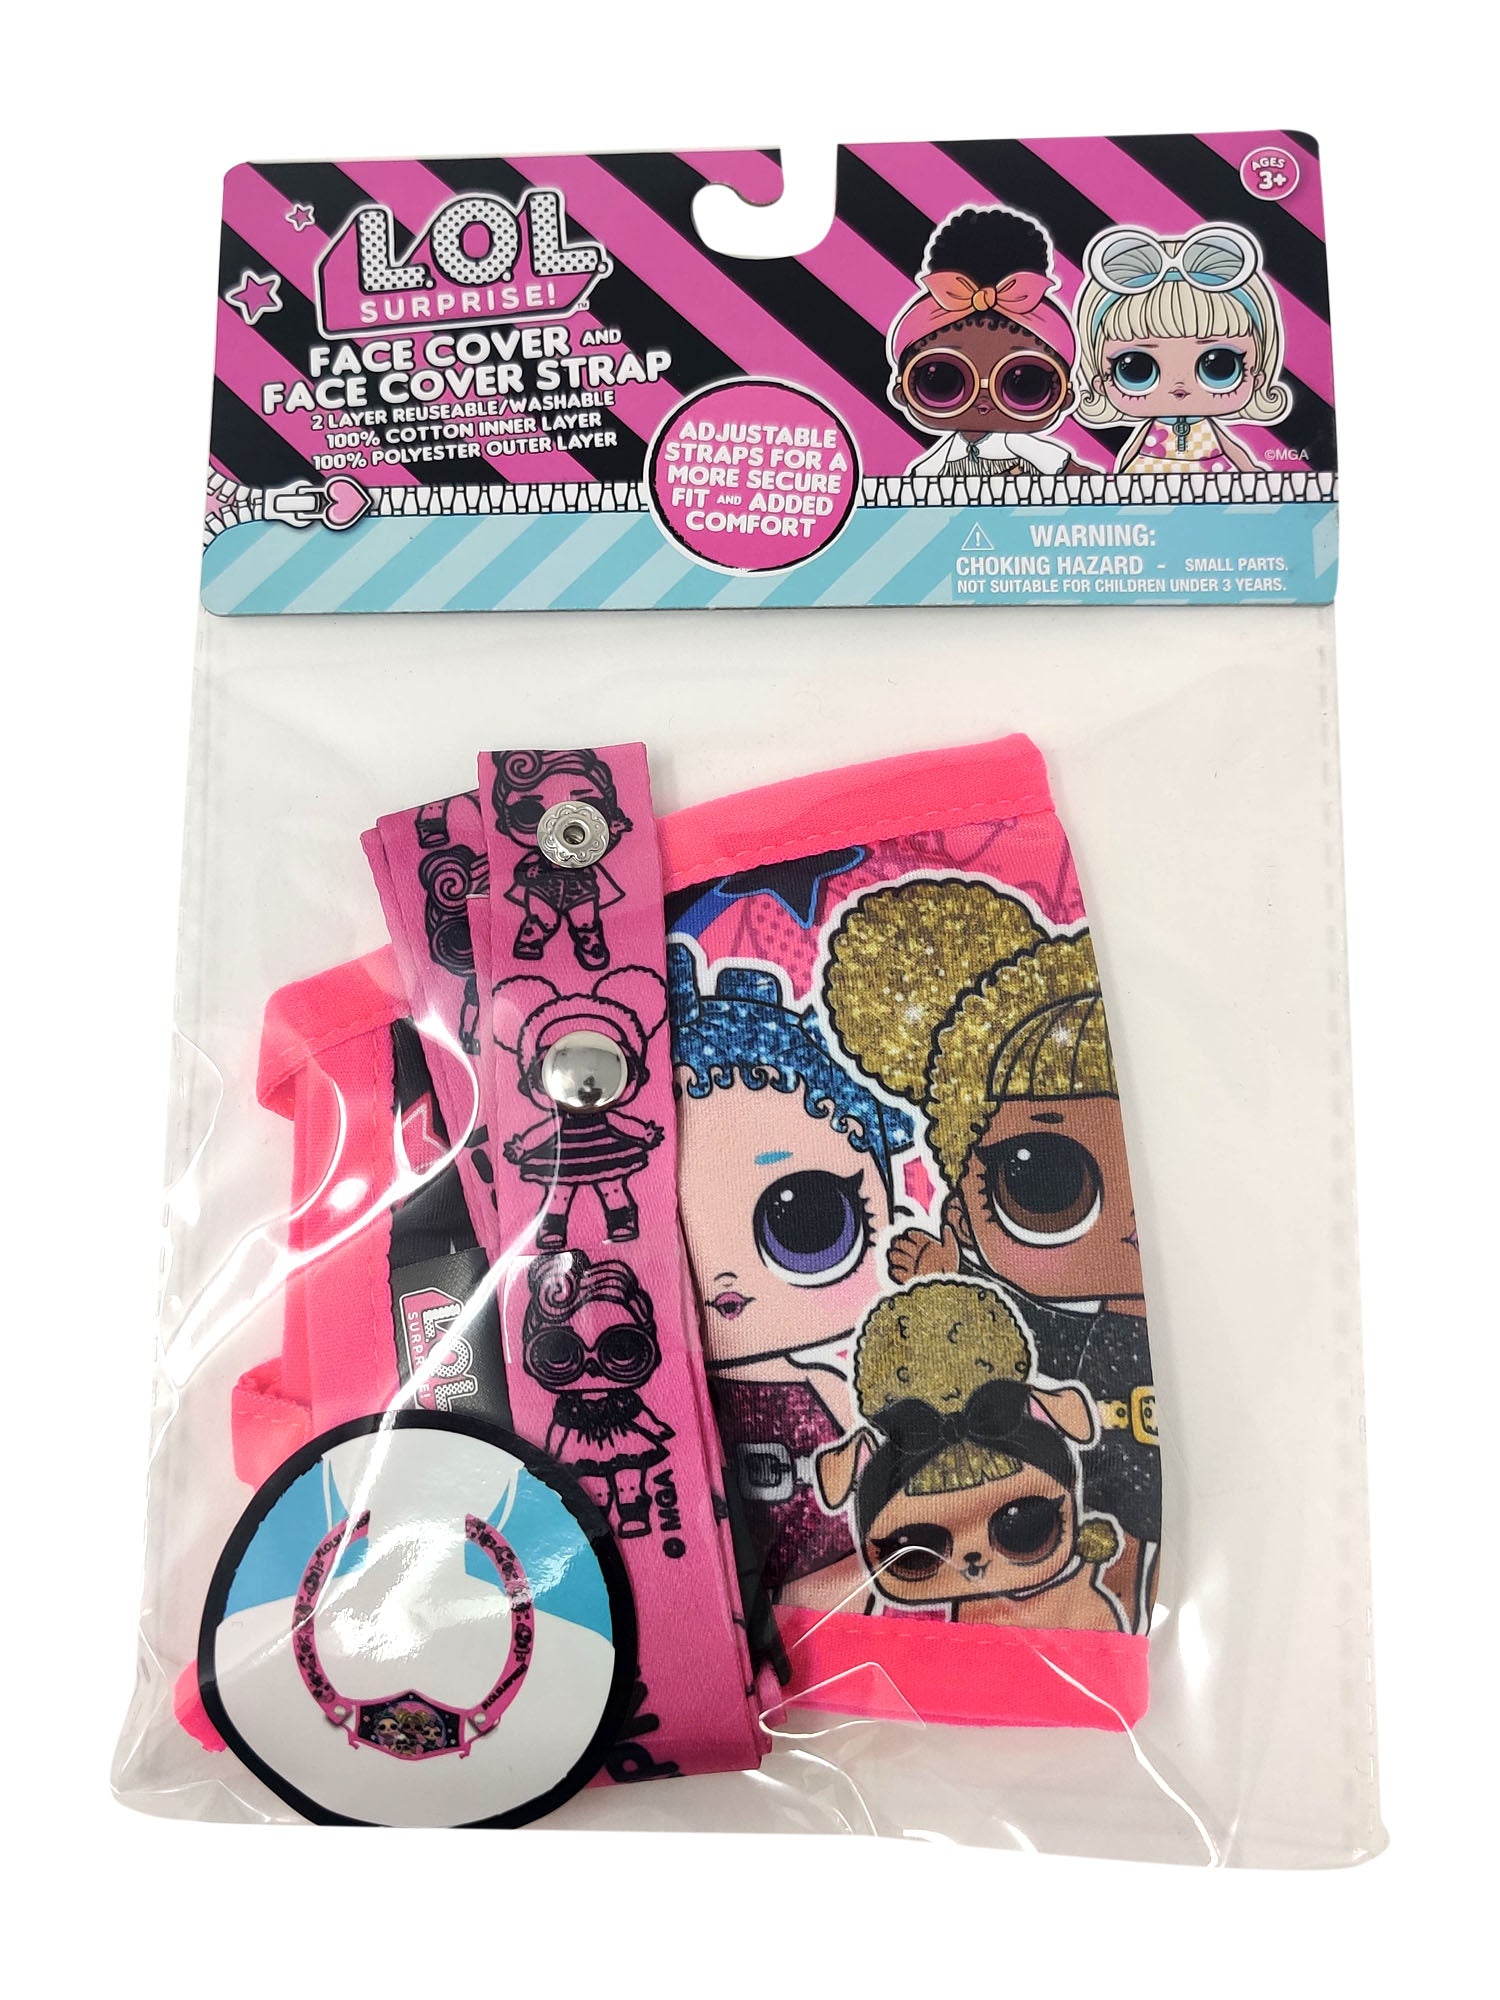 Kids Girls LOL Surprise Reusable Face Mask Pink w/ Removable Strap Queen Bee